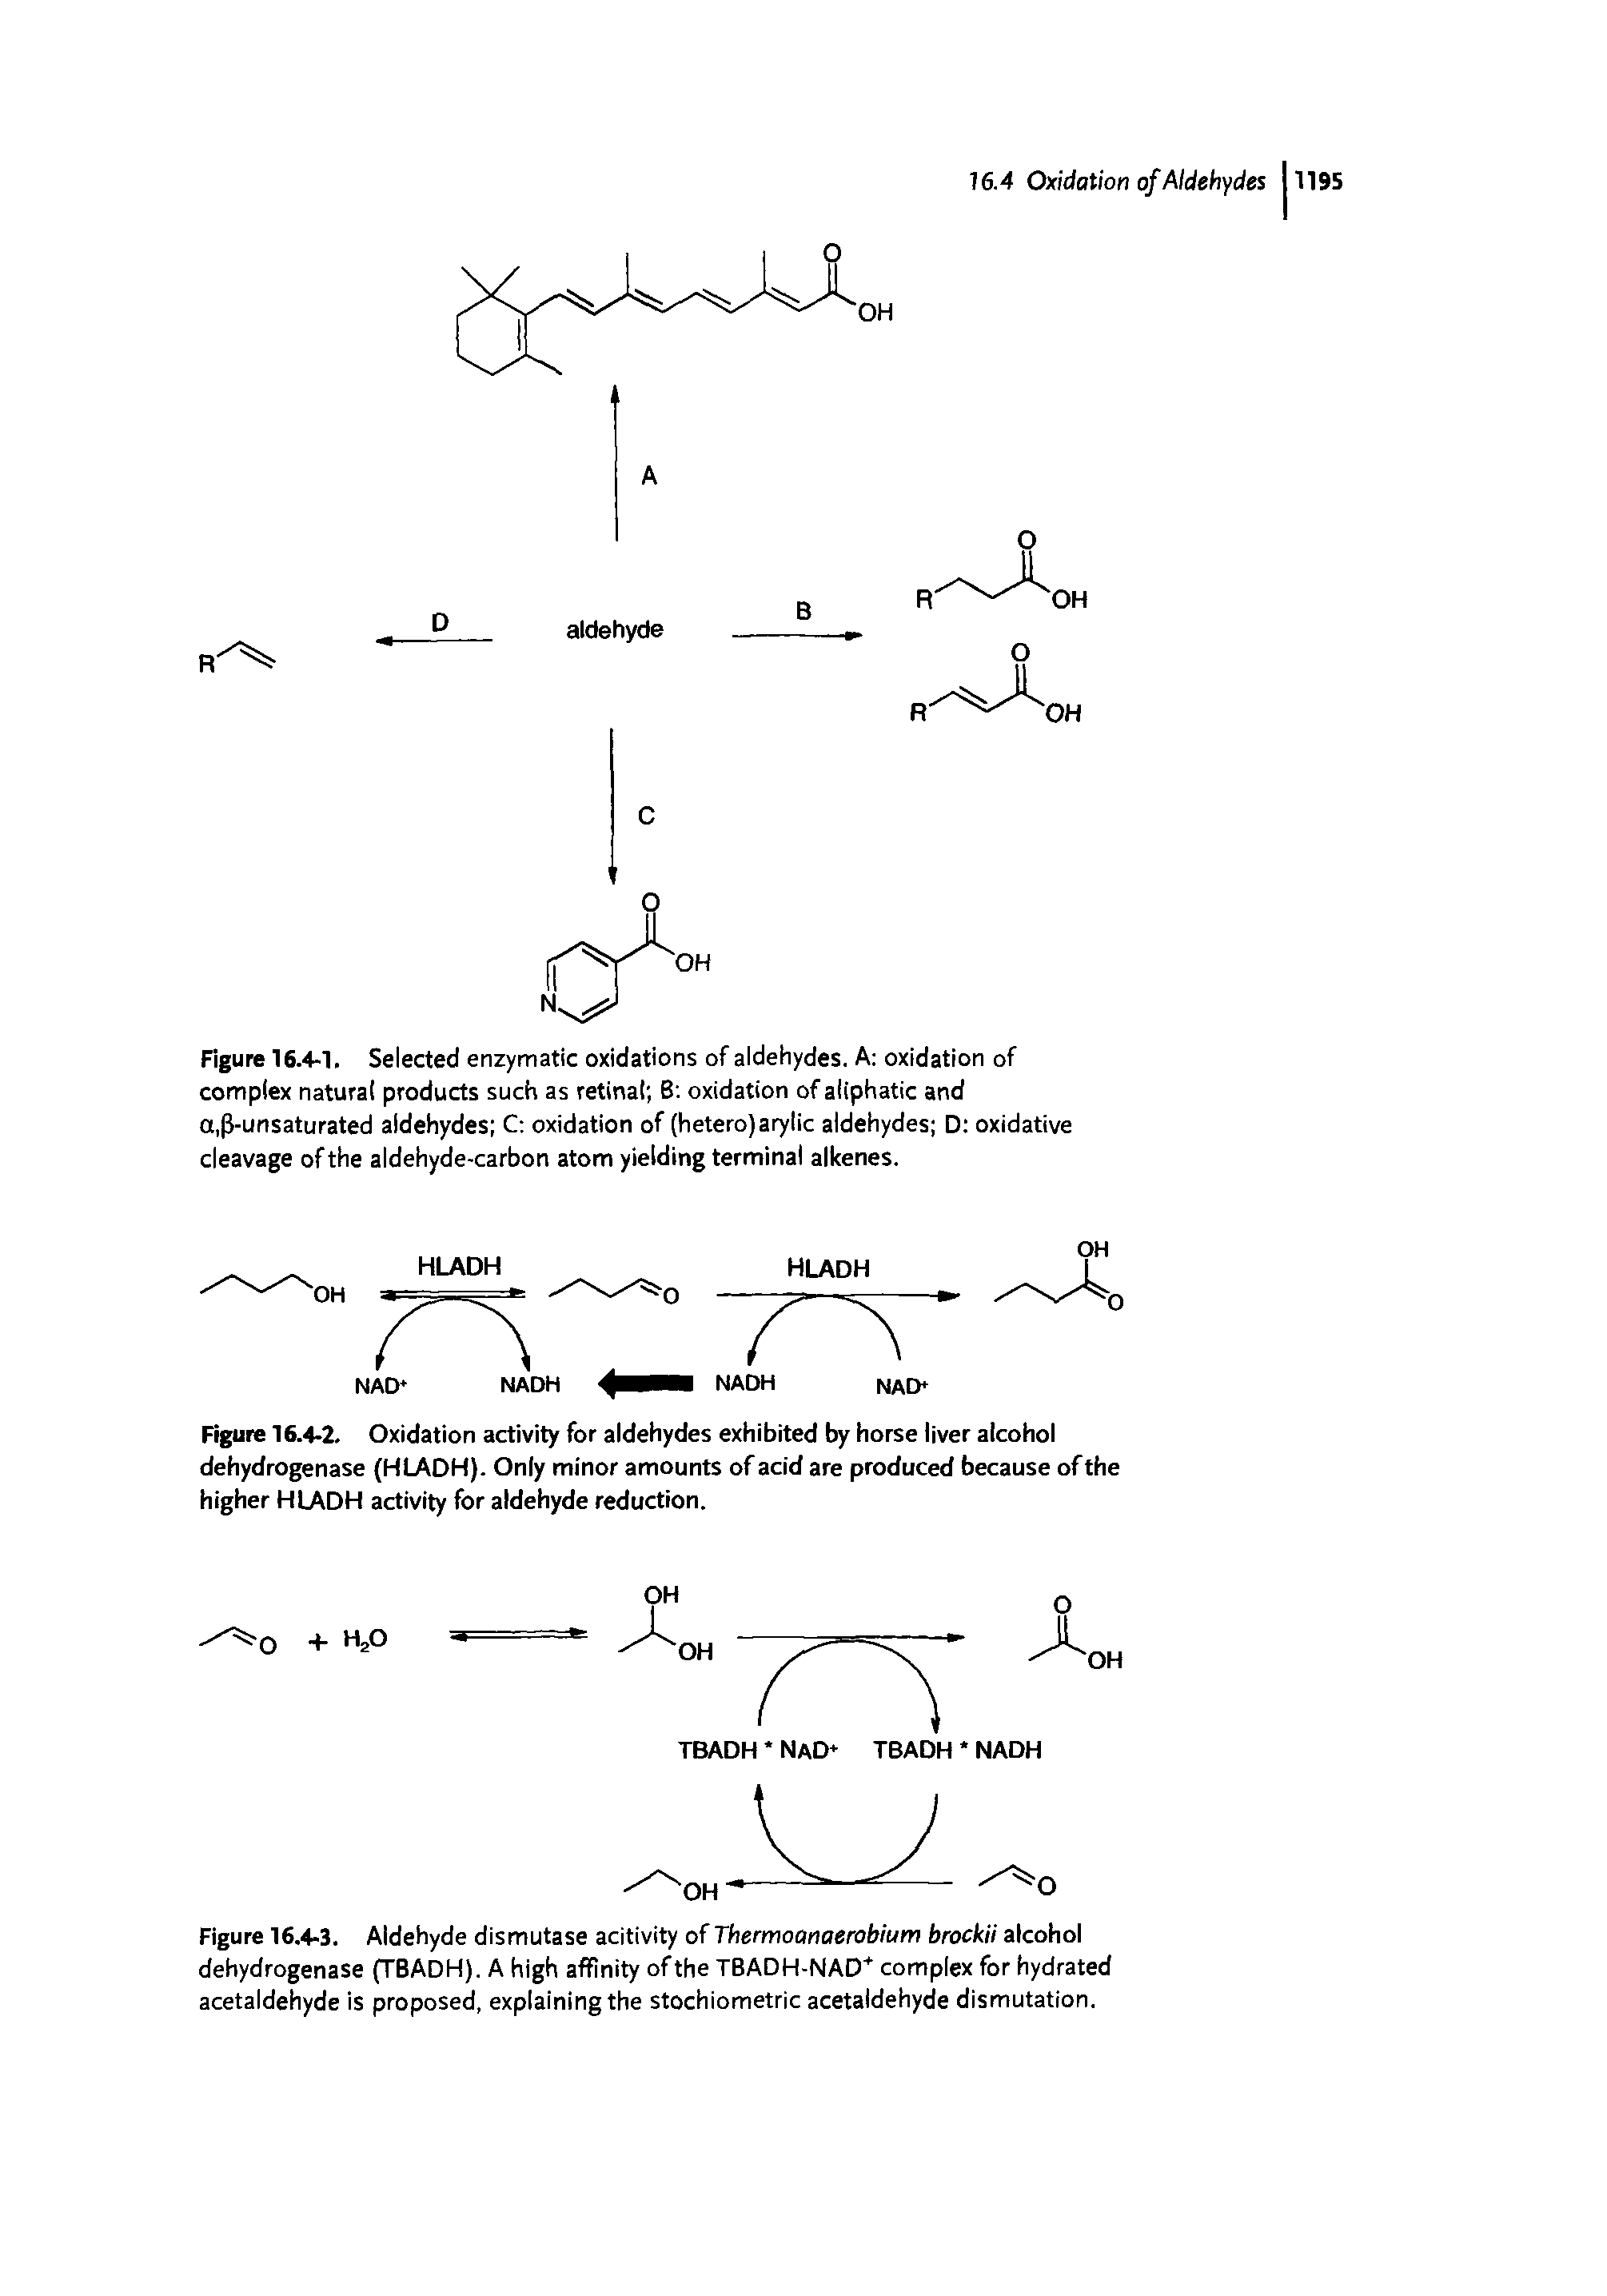 Figure 16.4-1. Selected enzymatic oxidations of aldehydes. A oxidation of complex natural products such as retinal B oxidation of aliphatic and a,P-unsaturated aldehydes C oxidation of (hetero)arylic aldehydes D oxidative cleavage of the aldehyde-carbon atom yielding terminal alkenes.